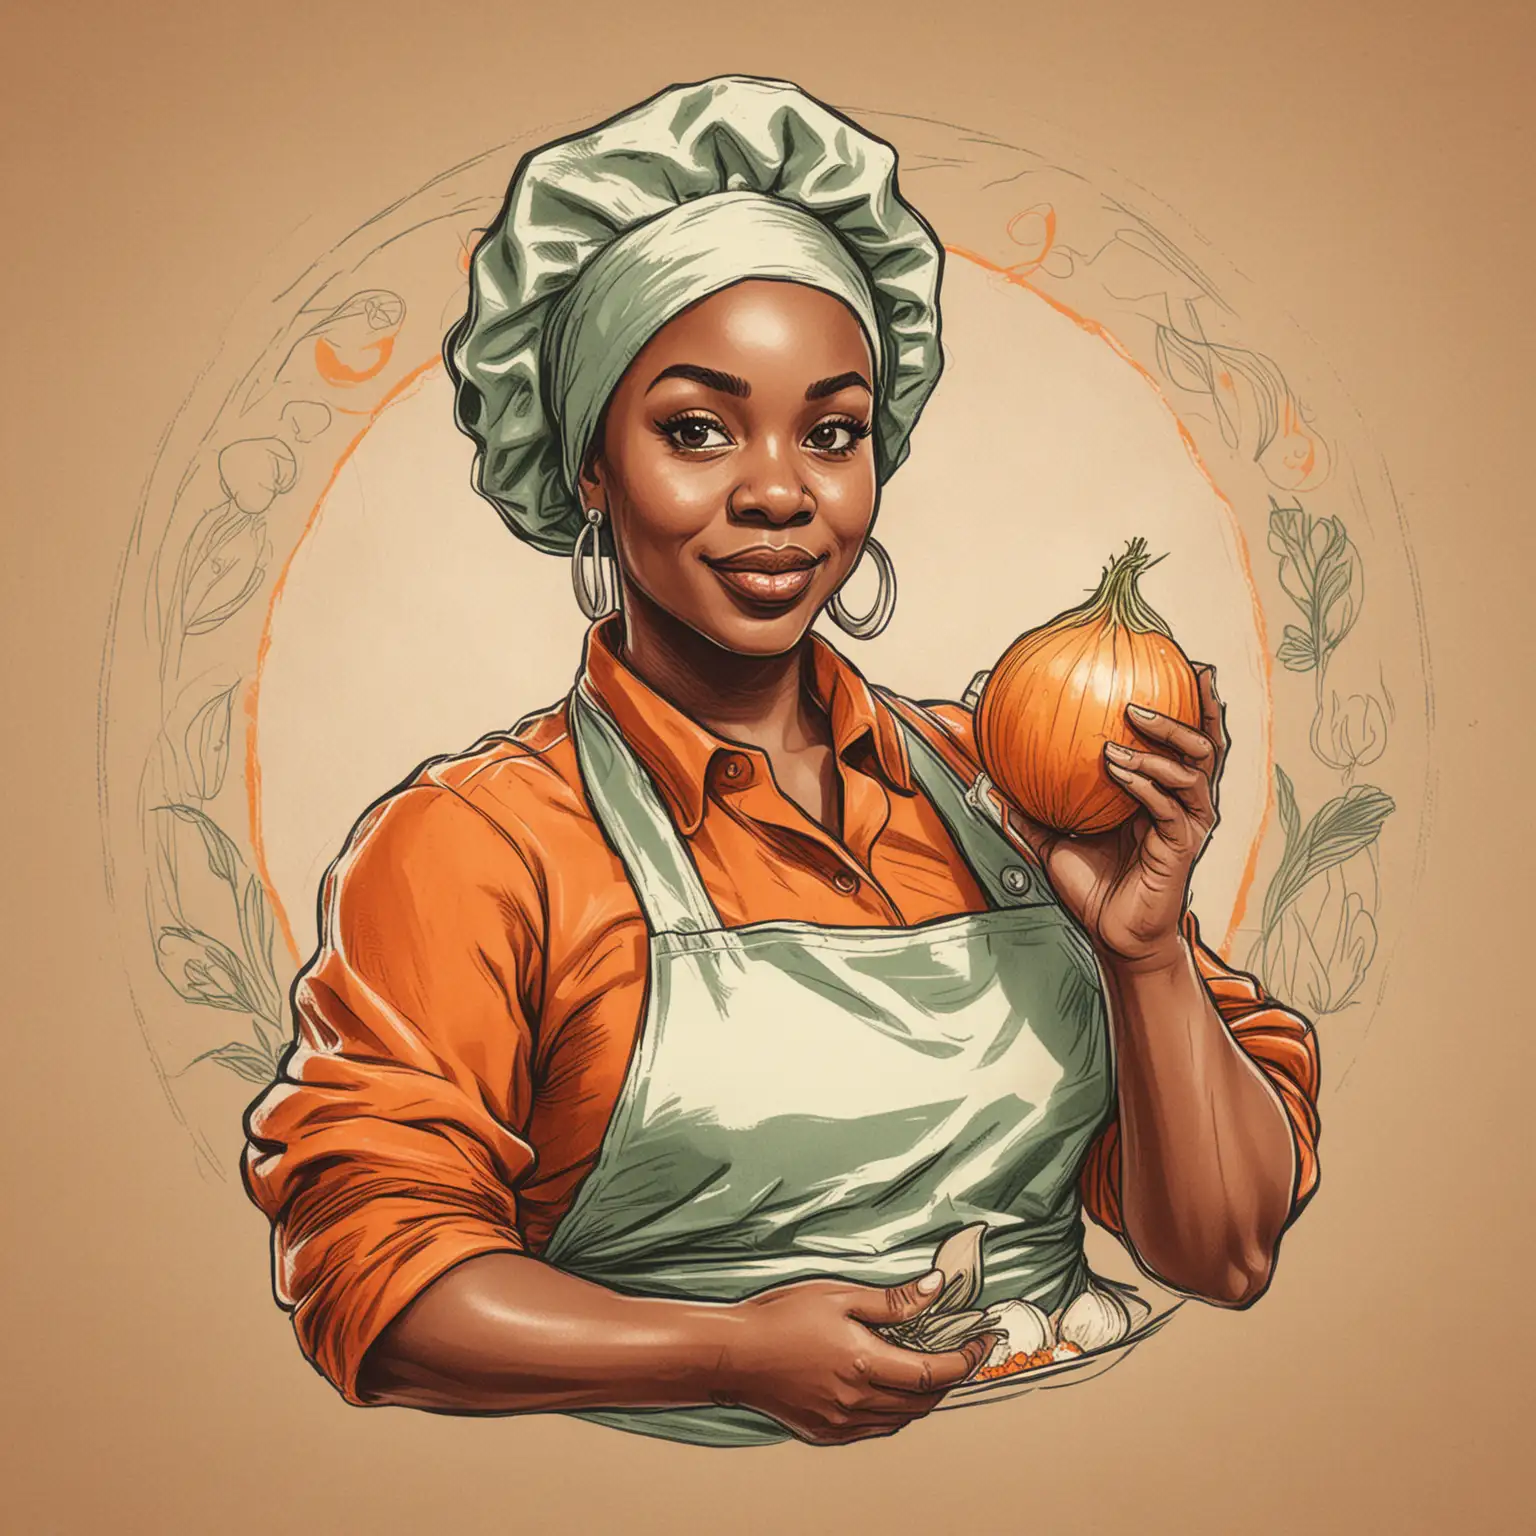 Plus Size Black Woman Chef Holding Seasonings Iconic Sketch Drawing